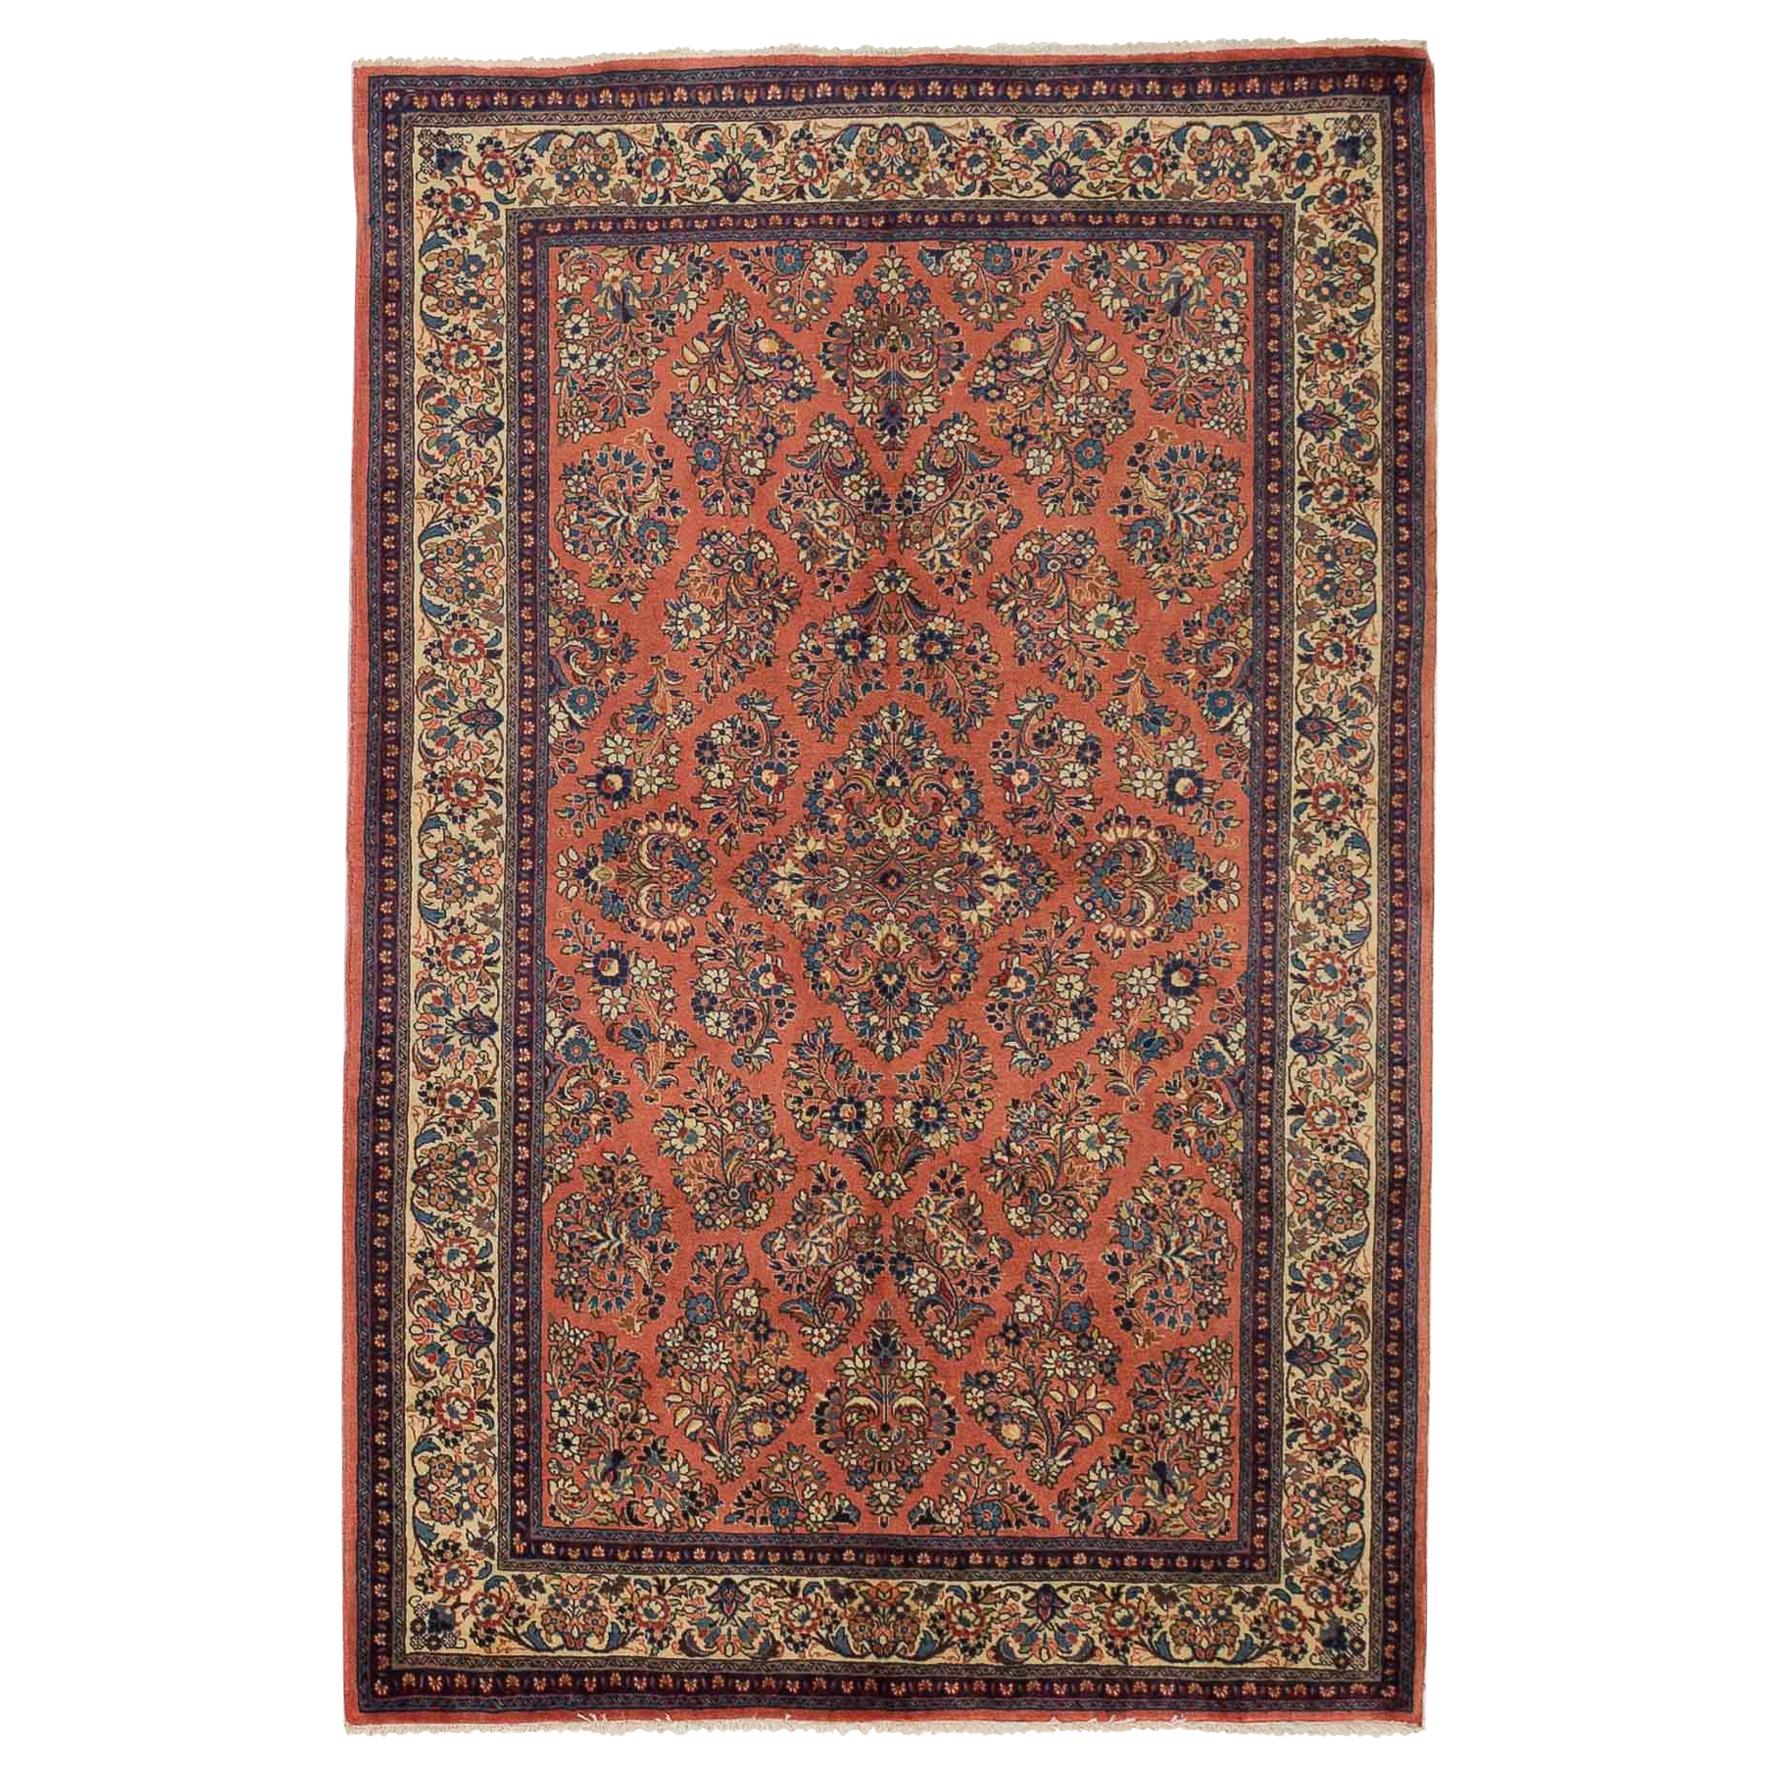 Antique Persian Sarouk Rug with Blue and Ivory Flower Heads on Red Center Field